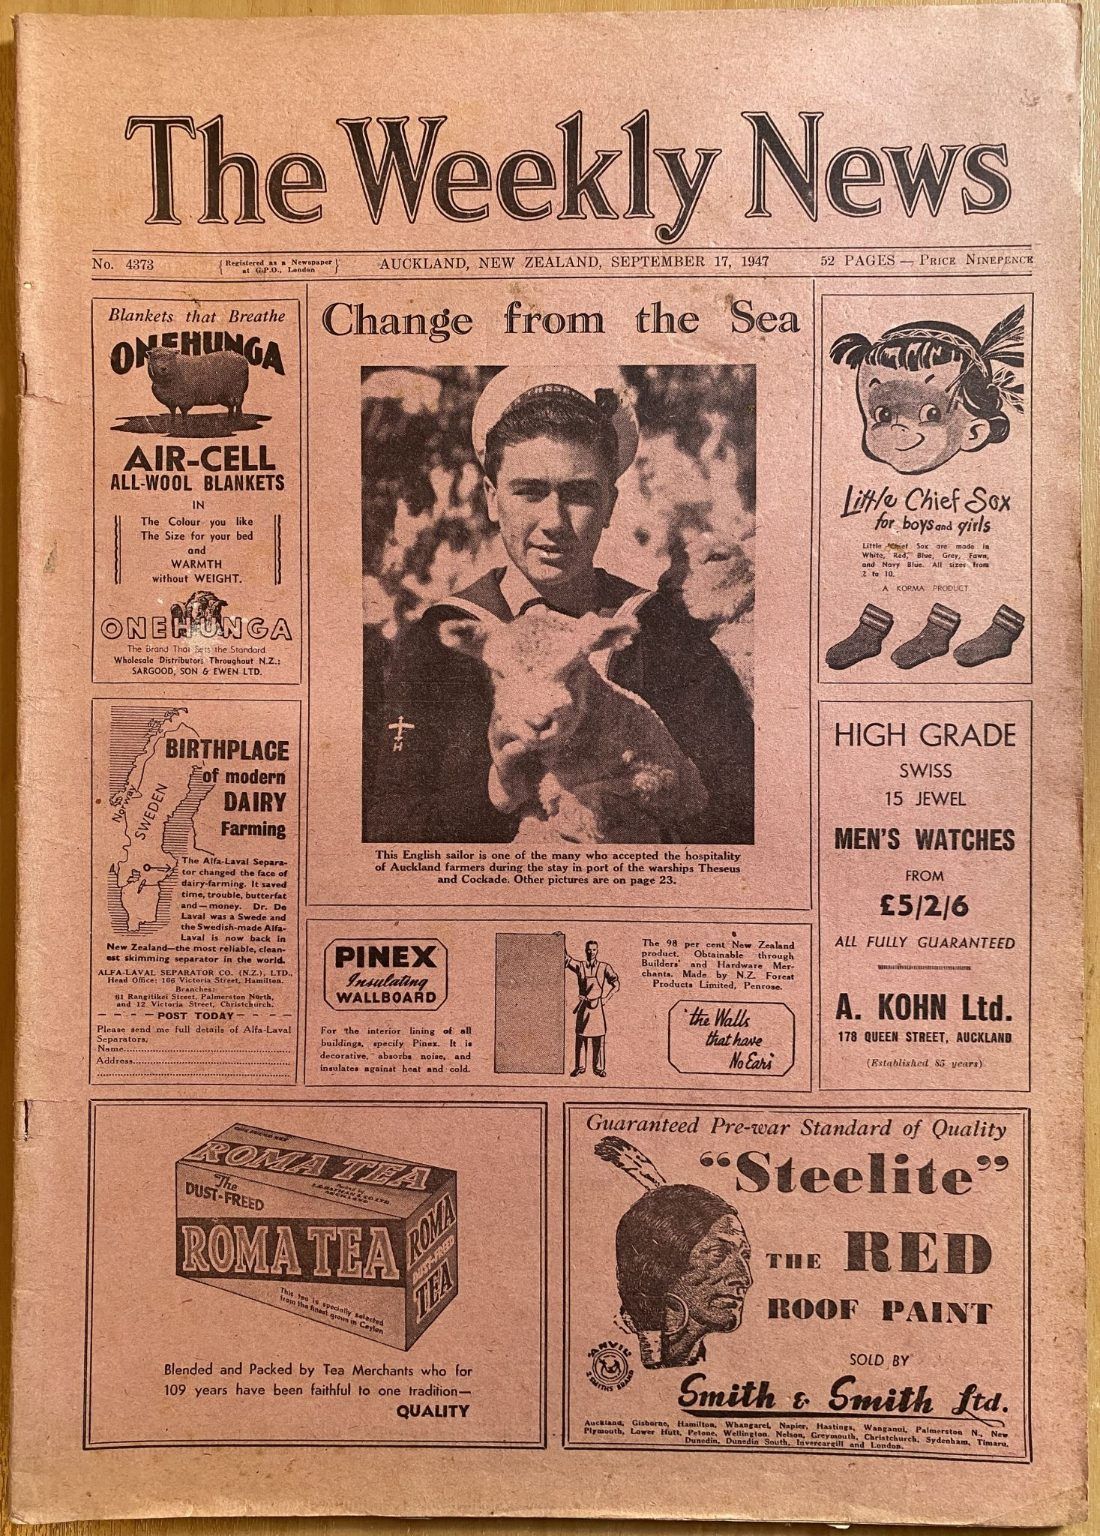 OLD NEWSPAPER: The Weekly News, No. 4373, 17 September 1947